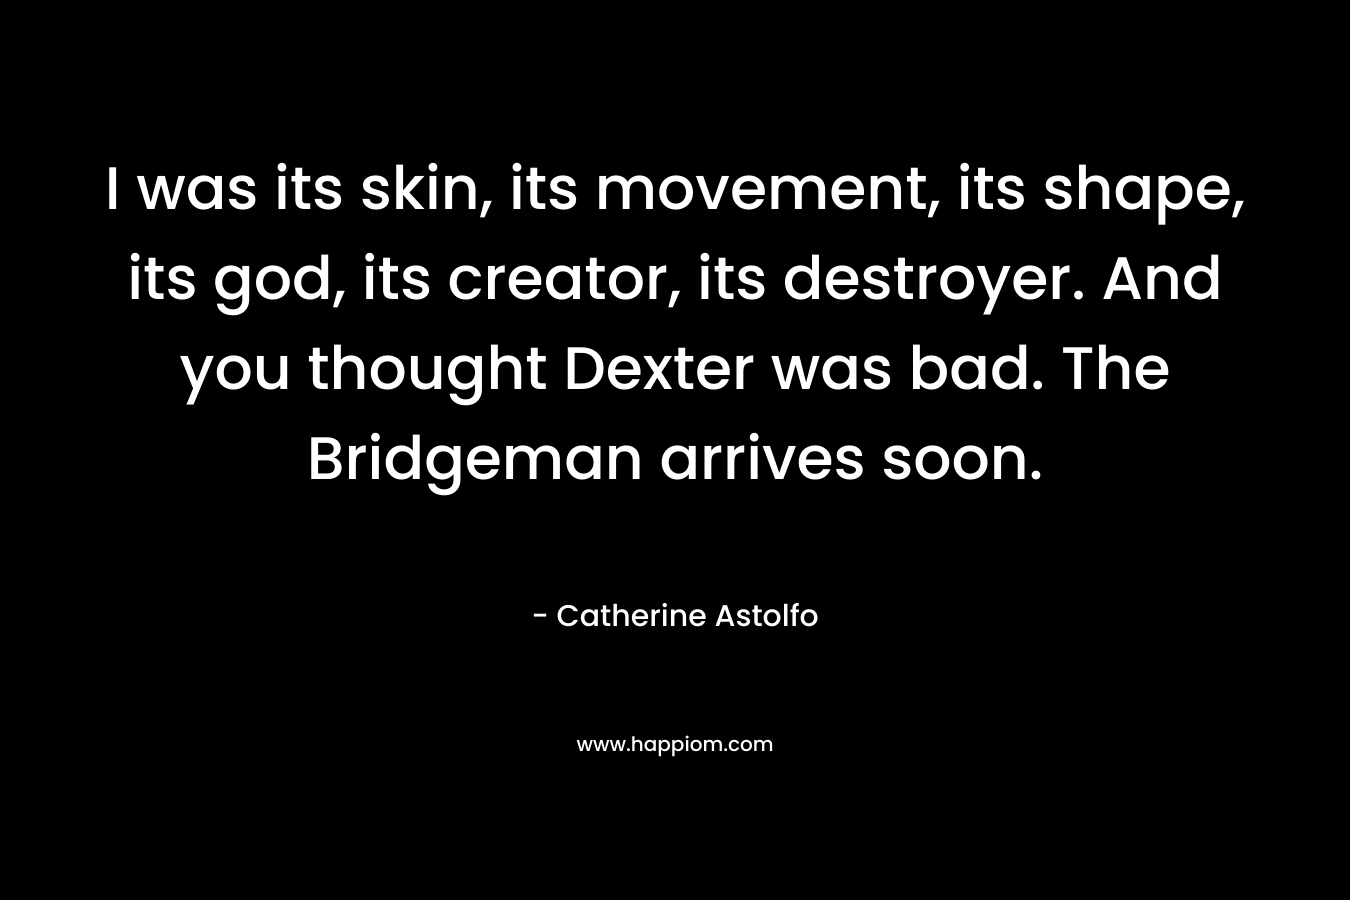 I was its skin, its movement, its shape, its god, its creator, its destroyer. And you thought Dexter was bad. The Bridgeman arrives soon. – Catherine Astolfo